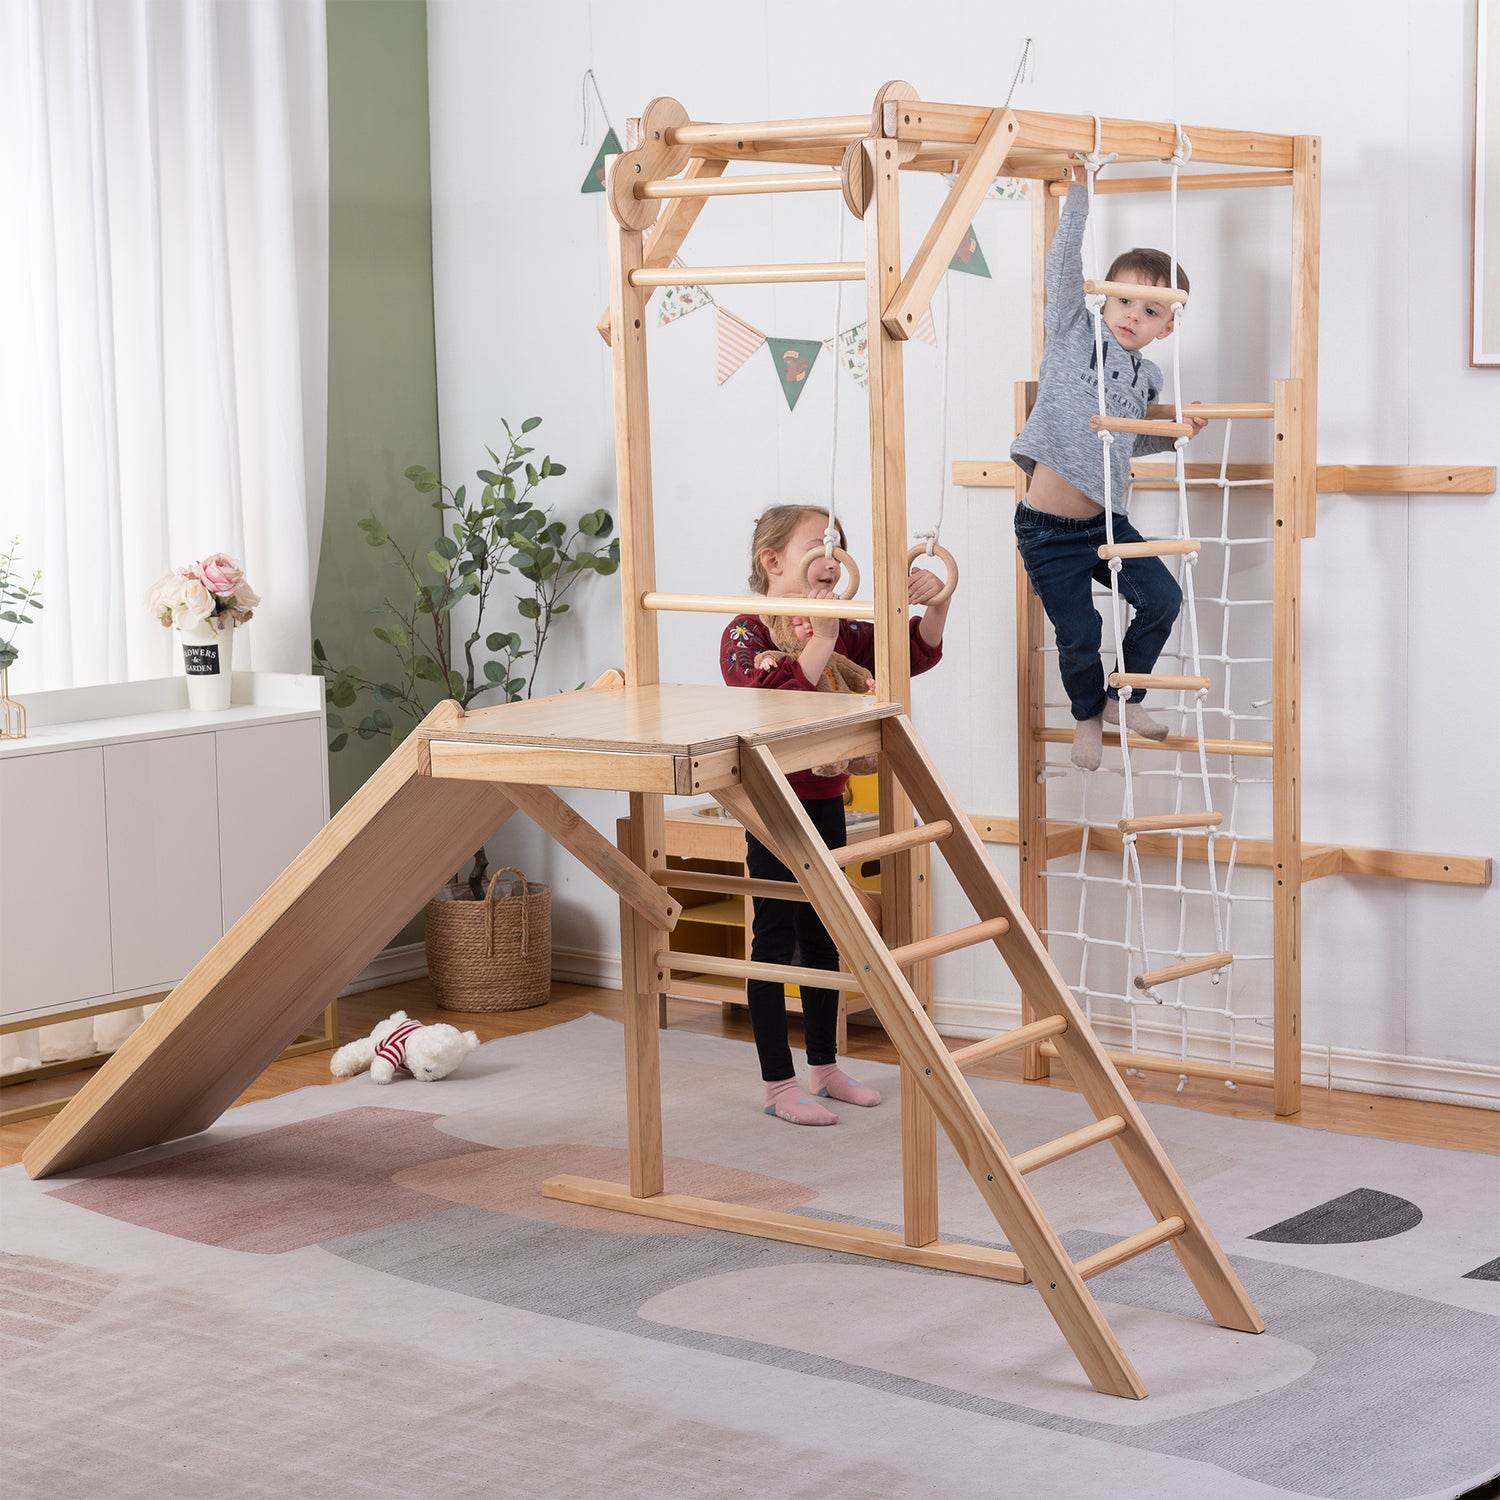 Children Playing on The Grove Jungle Gym - Avenlur's Premium 8 in 1 Wooden Playset for Older Kids in Natural Wood Color